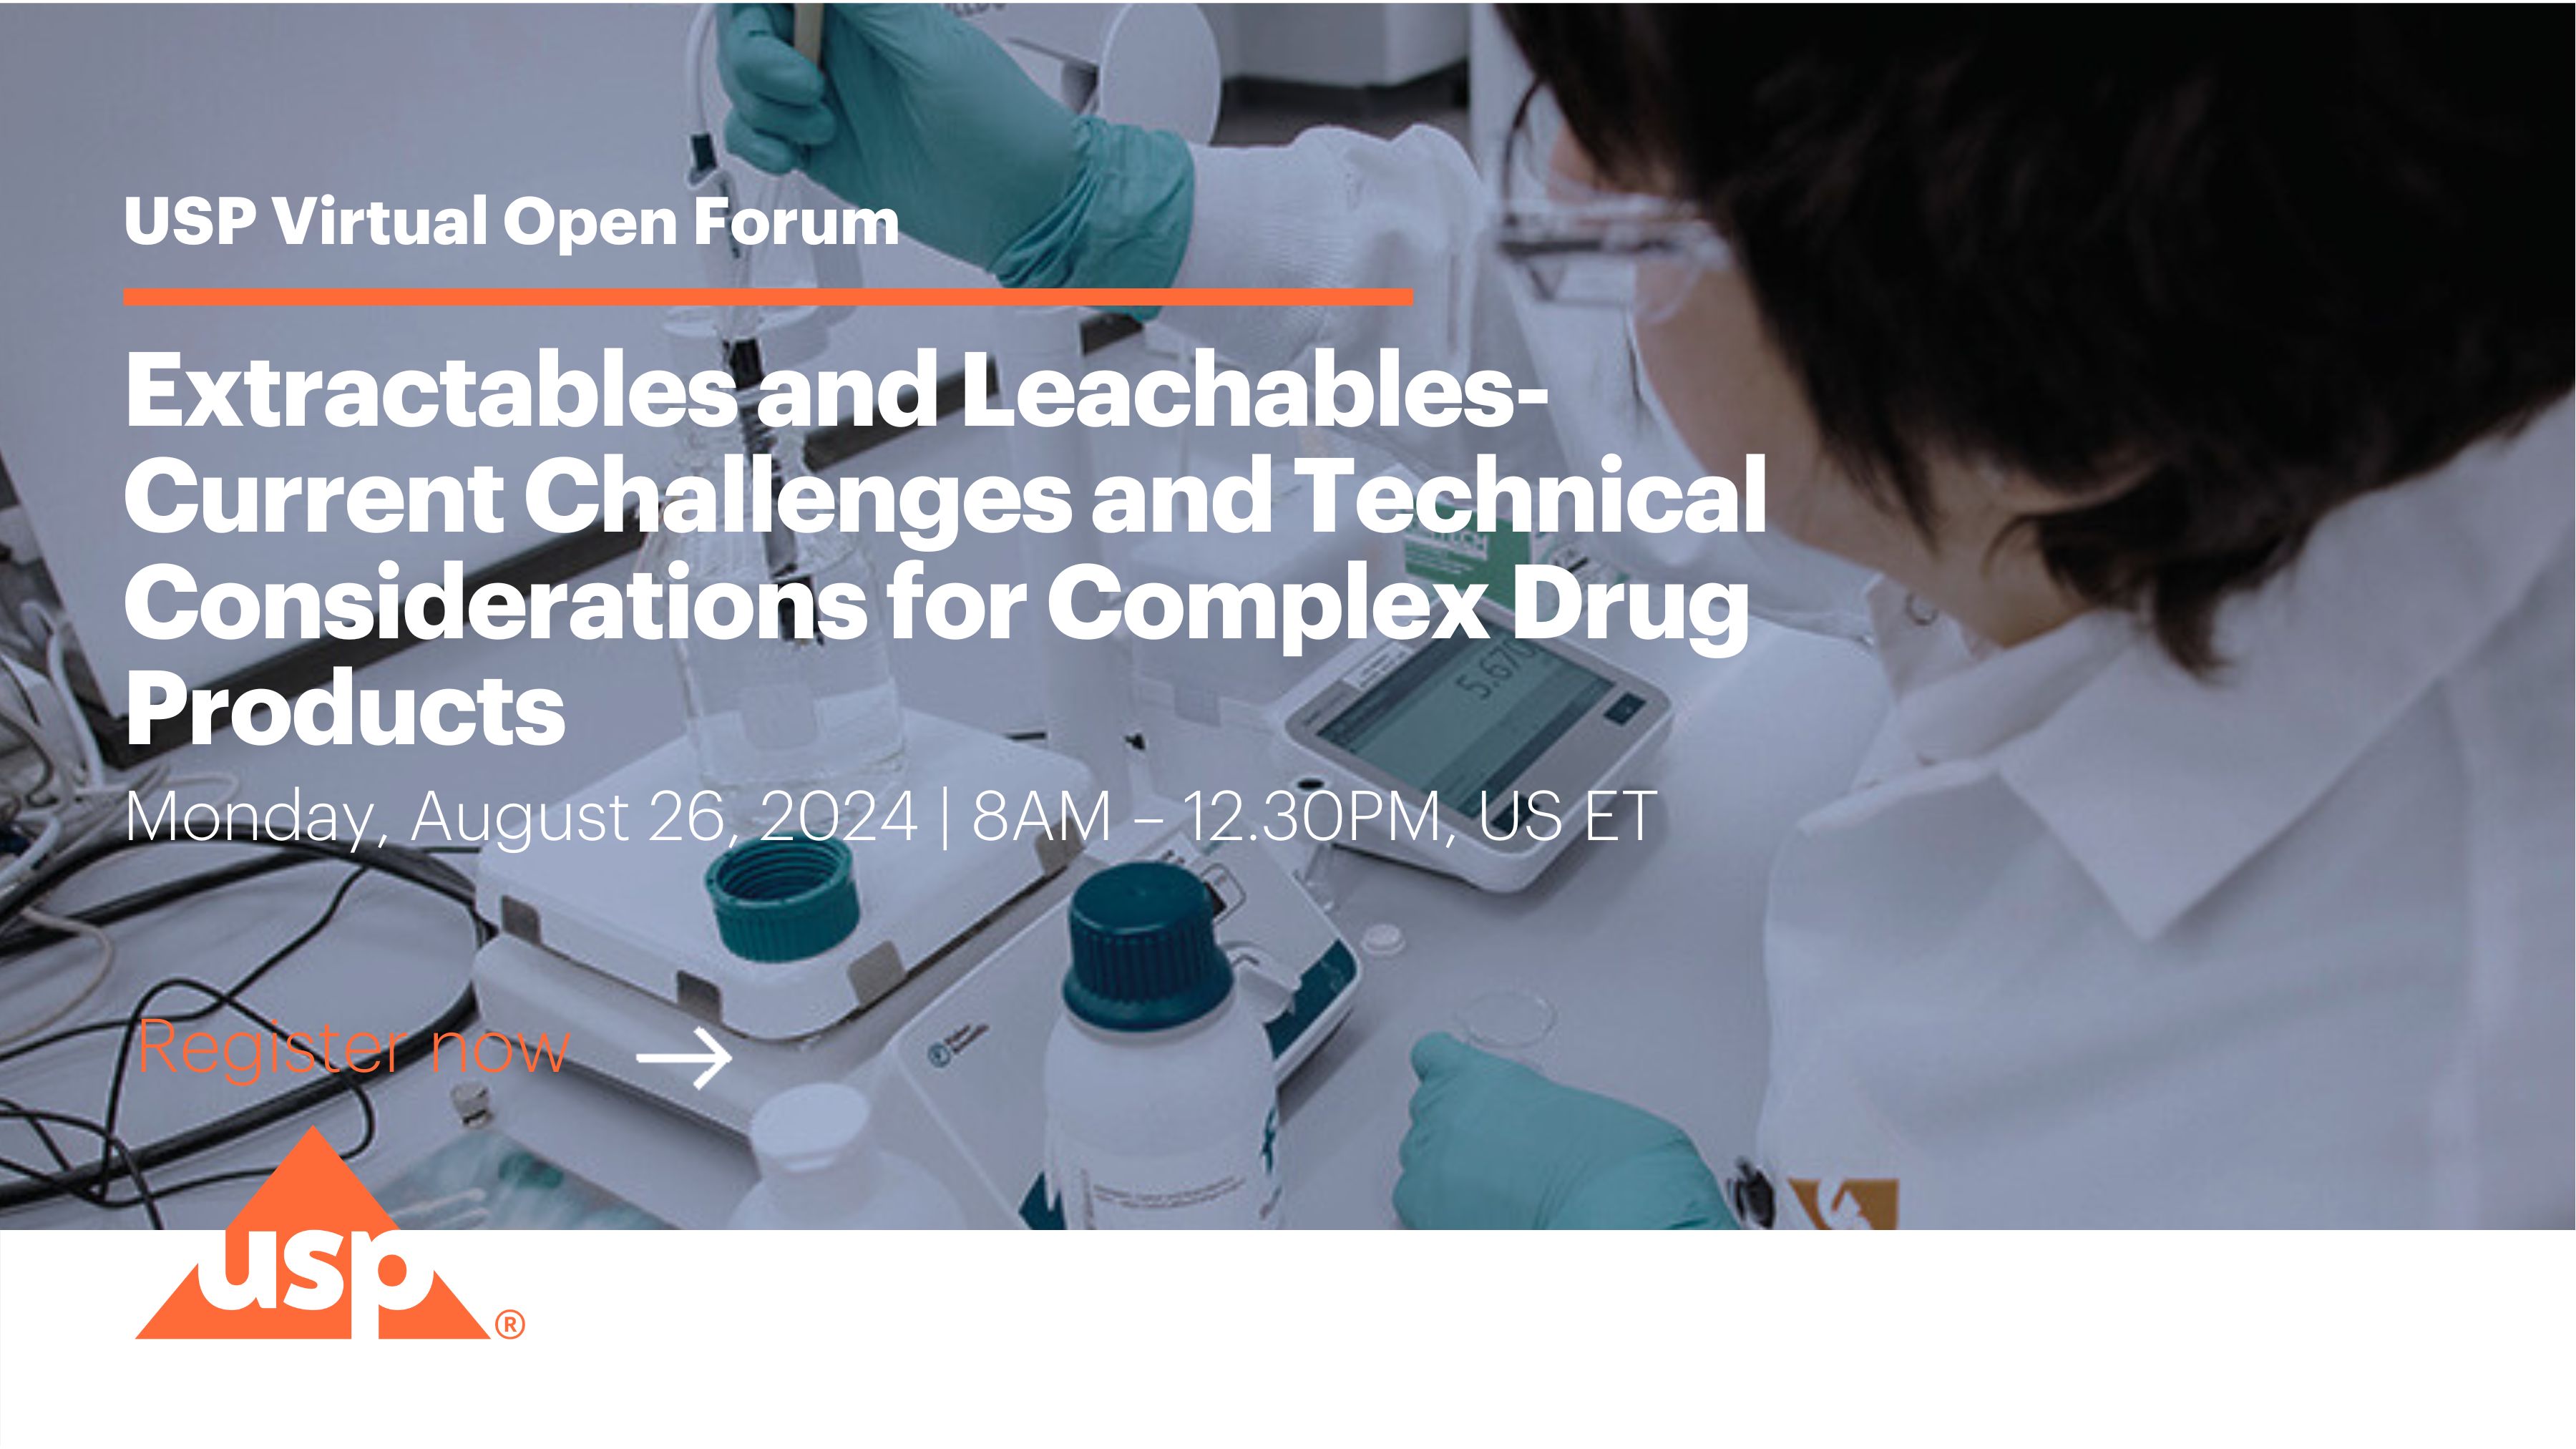 USP Open Forum: Extractables and Leachables – Current Challenges and Technical Considerations for Complex Drug Products